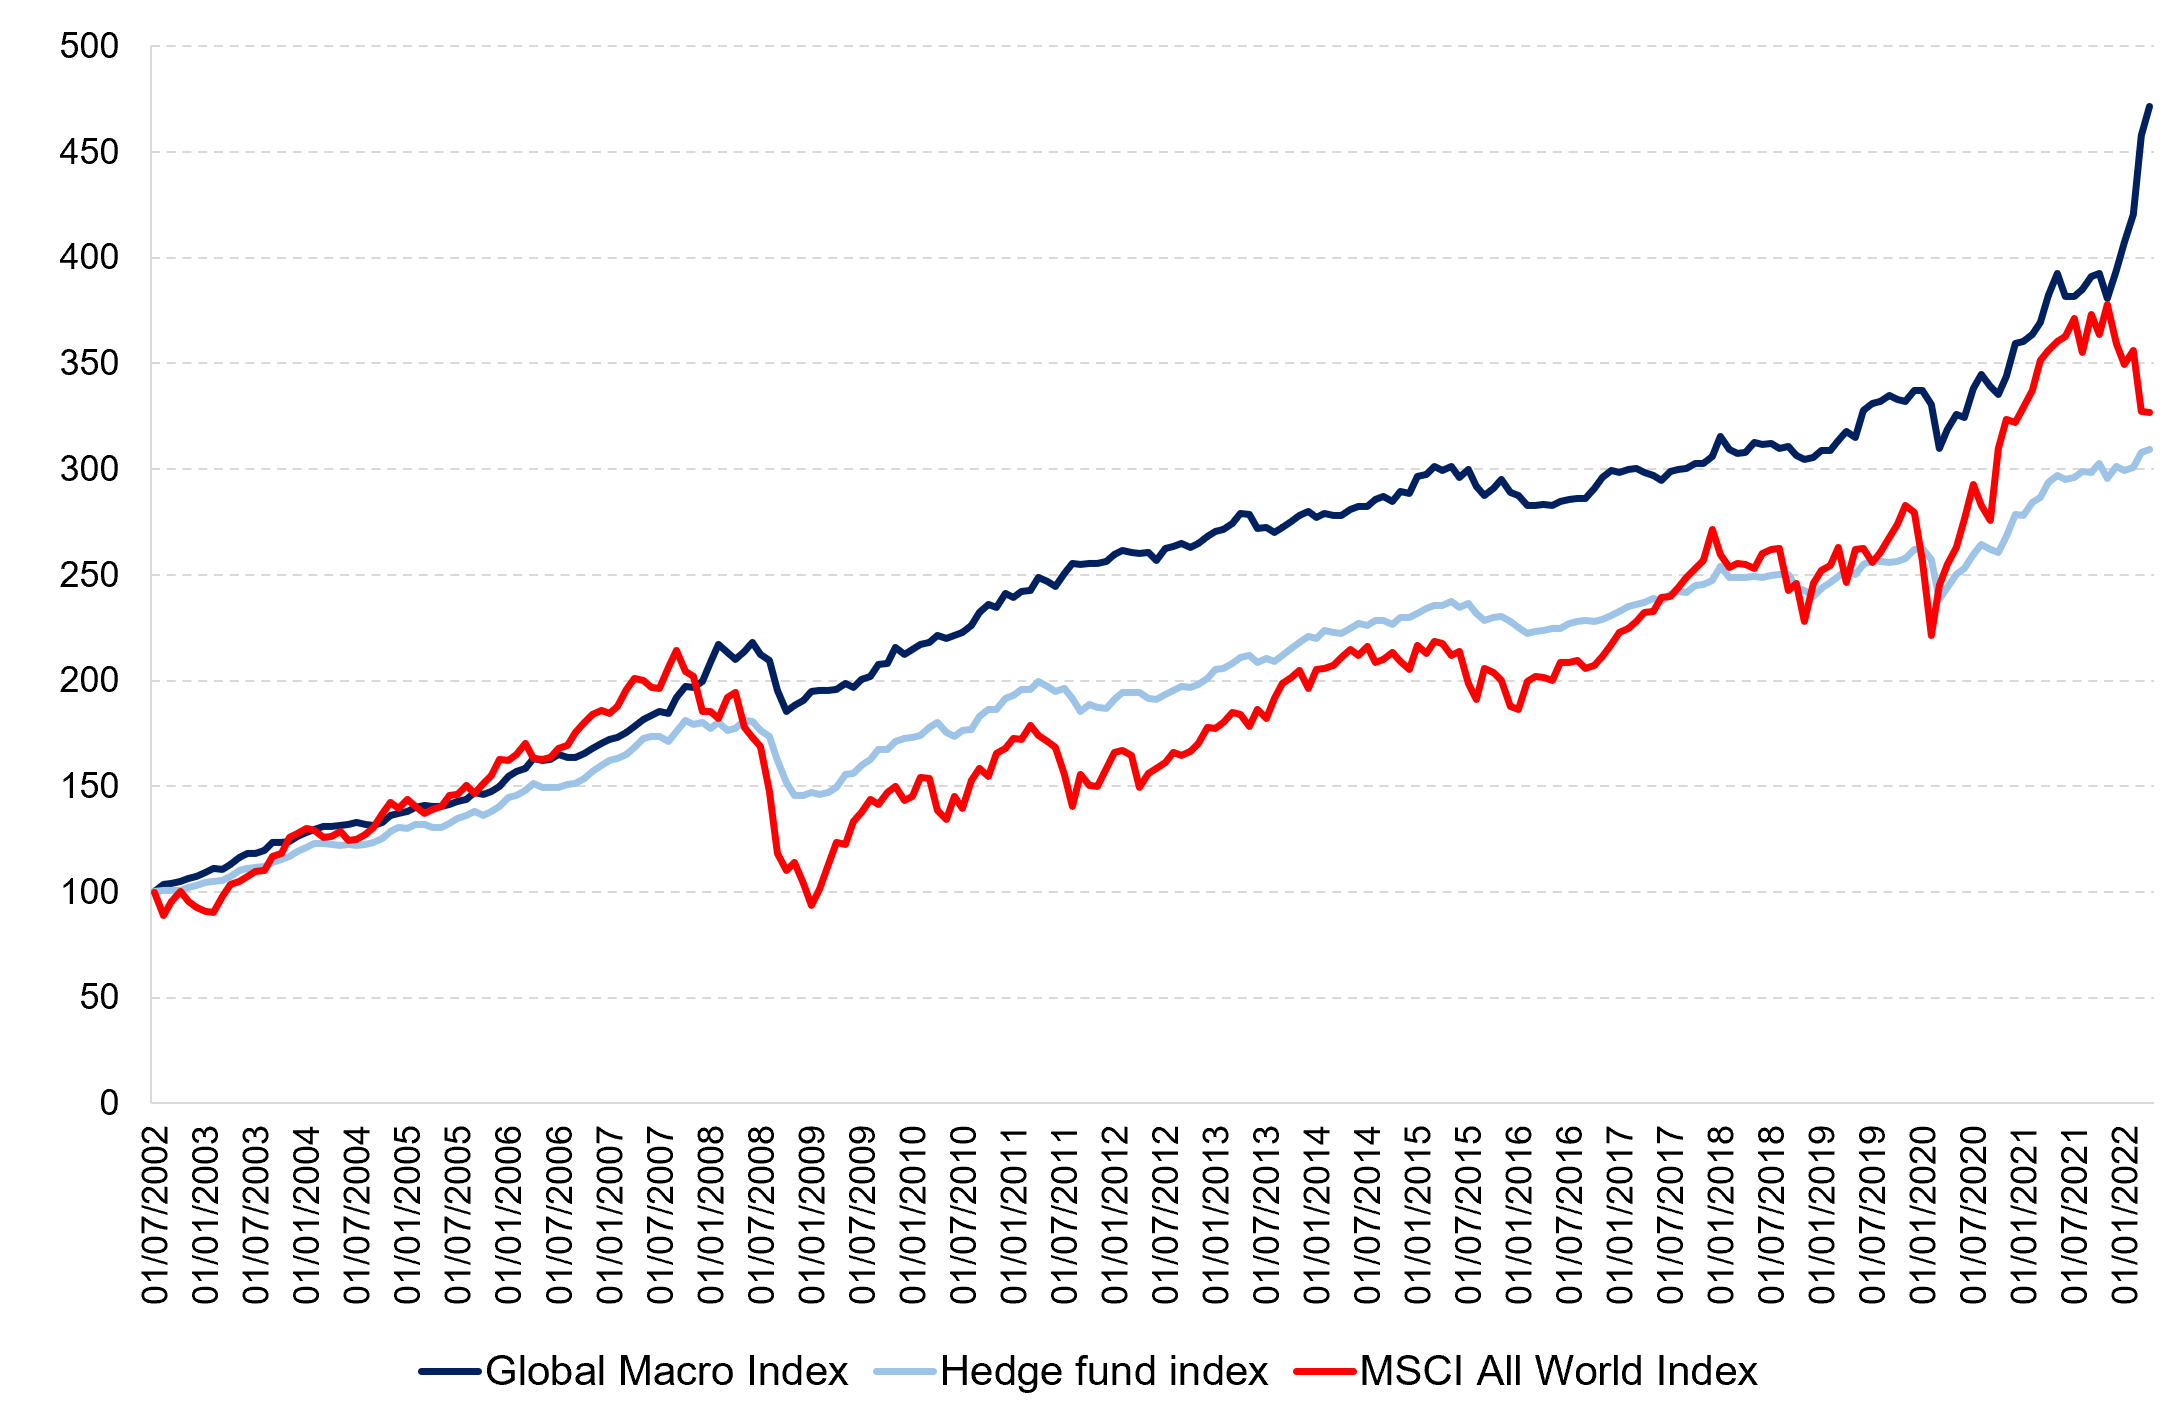 Performance of the global macro strategy